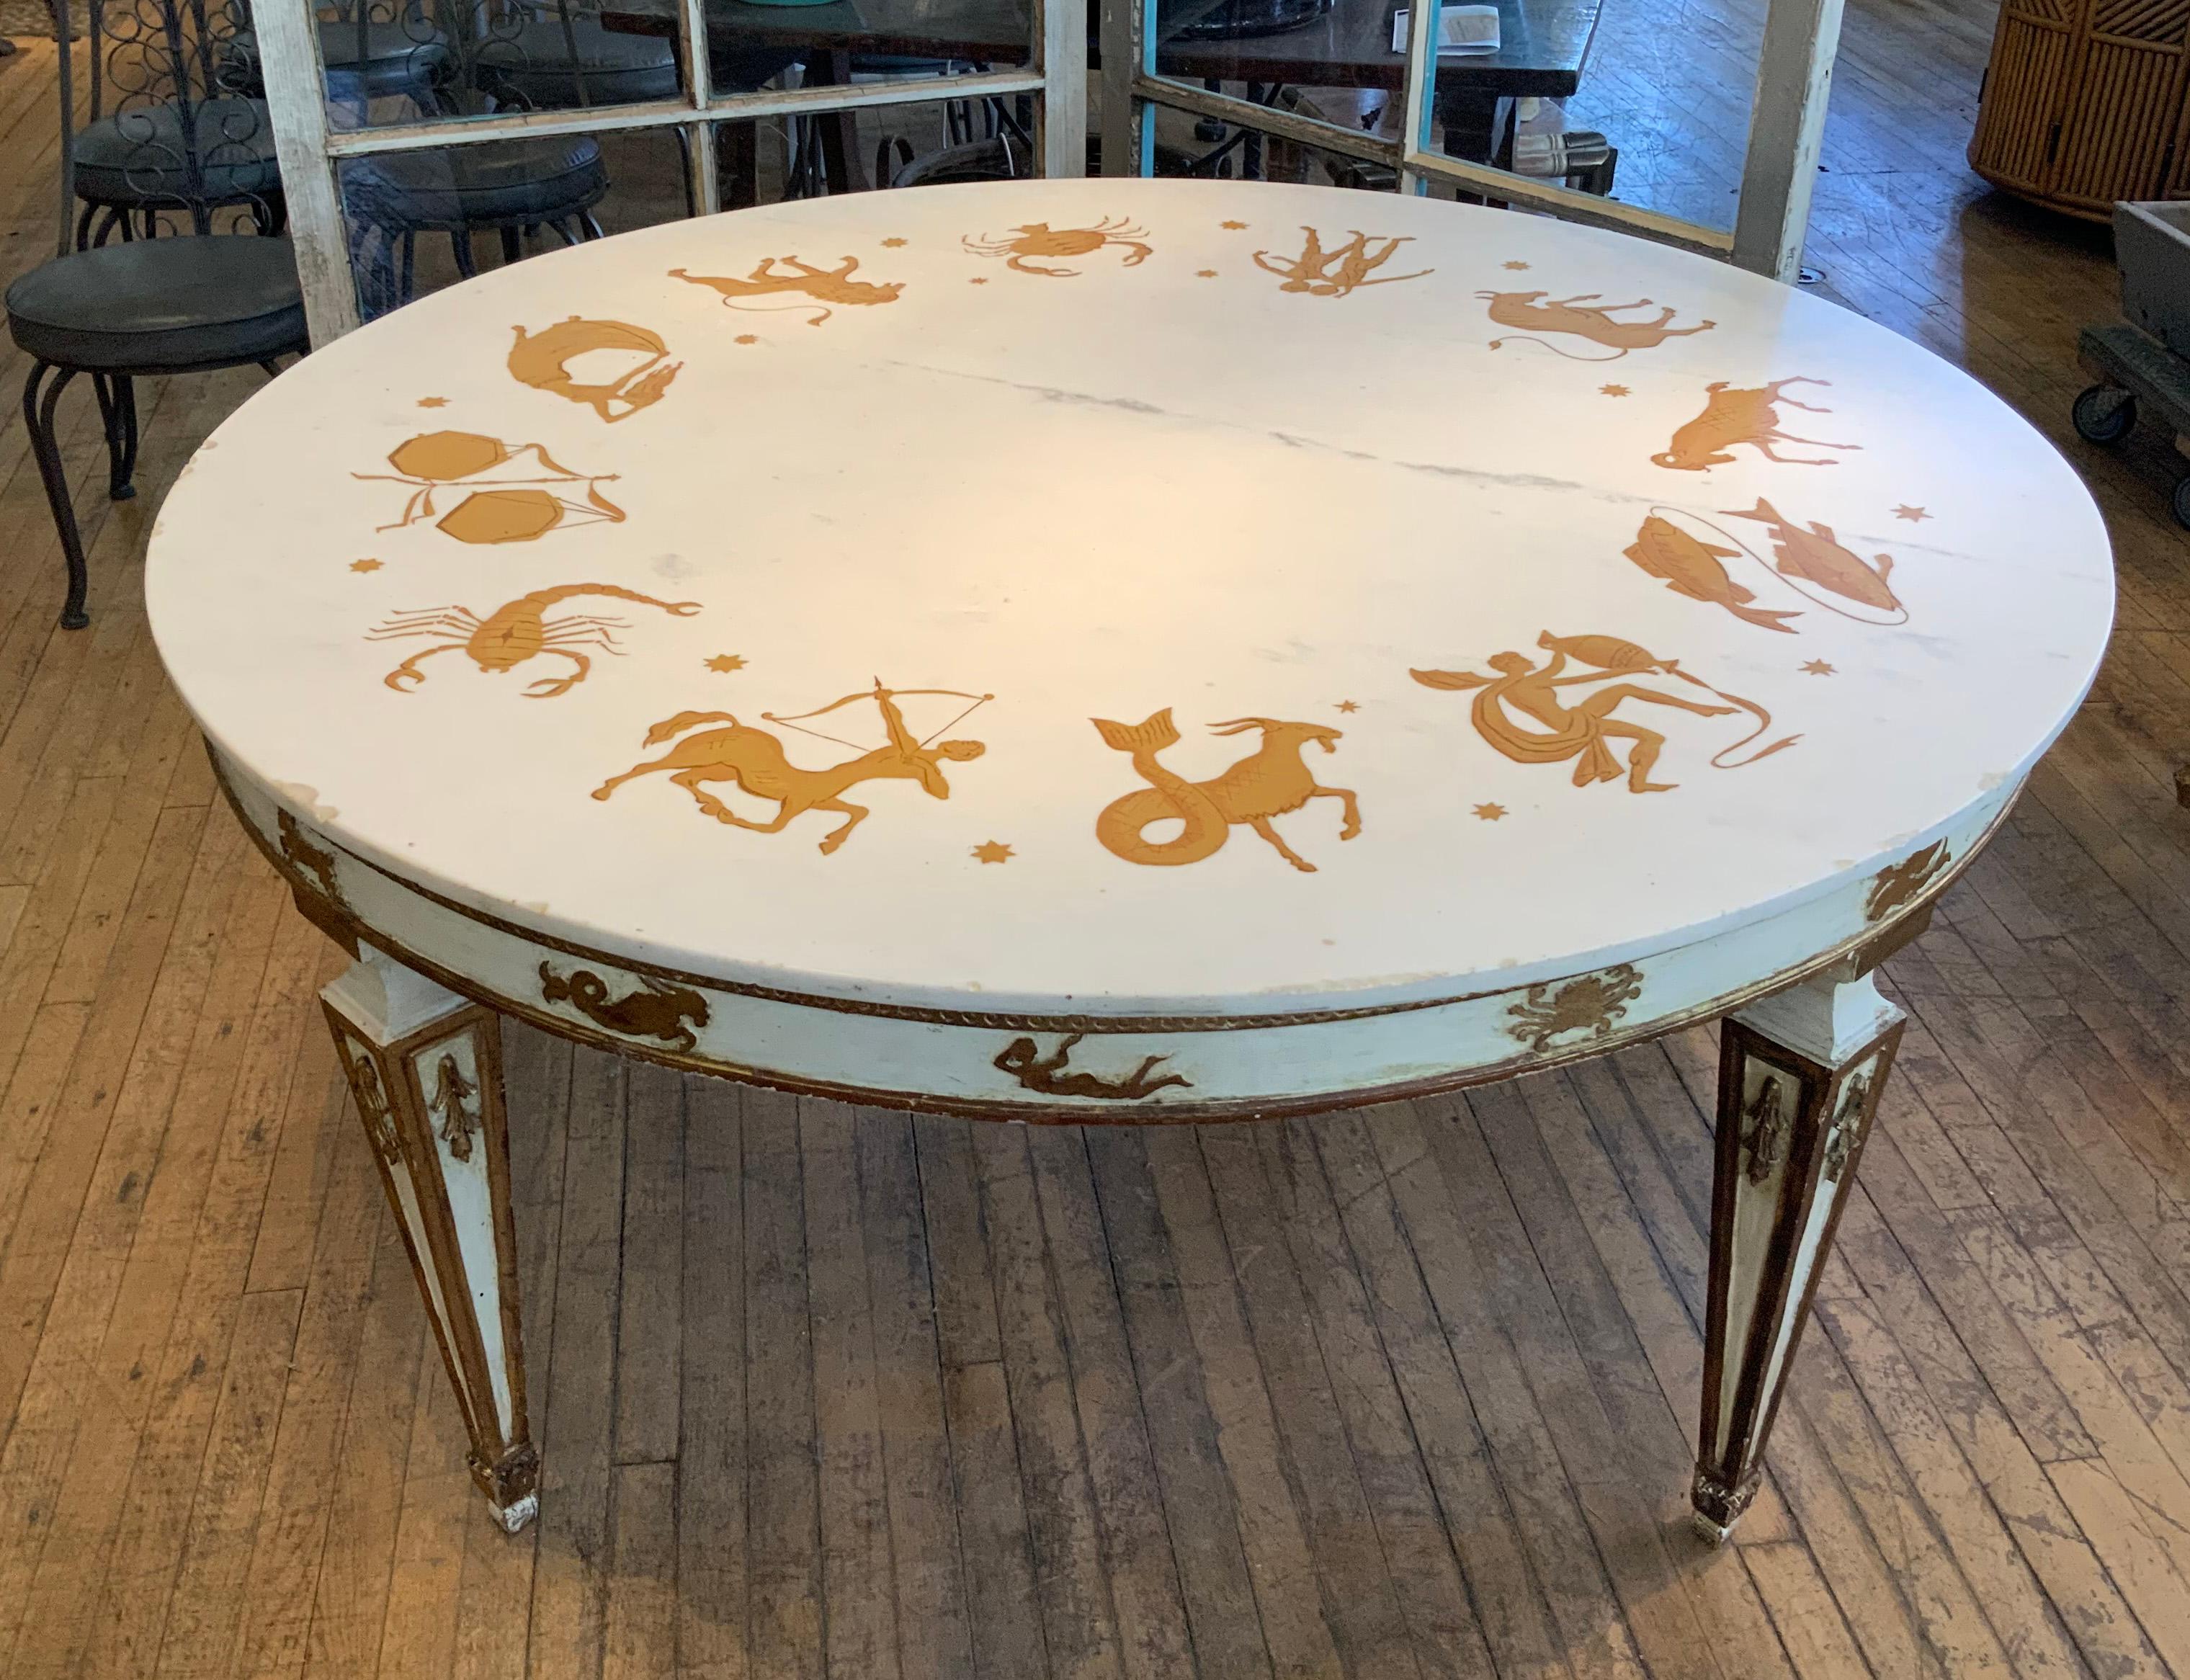 An incredible 1940's round marble top Italian dining table, with inlaid Zodiac signs all around, and the base carved and gilded with zodiac signs as well. retains its original label under the top. amazing table, incredibly unique. 

In good